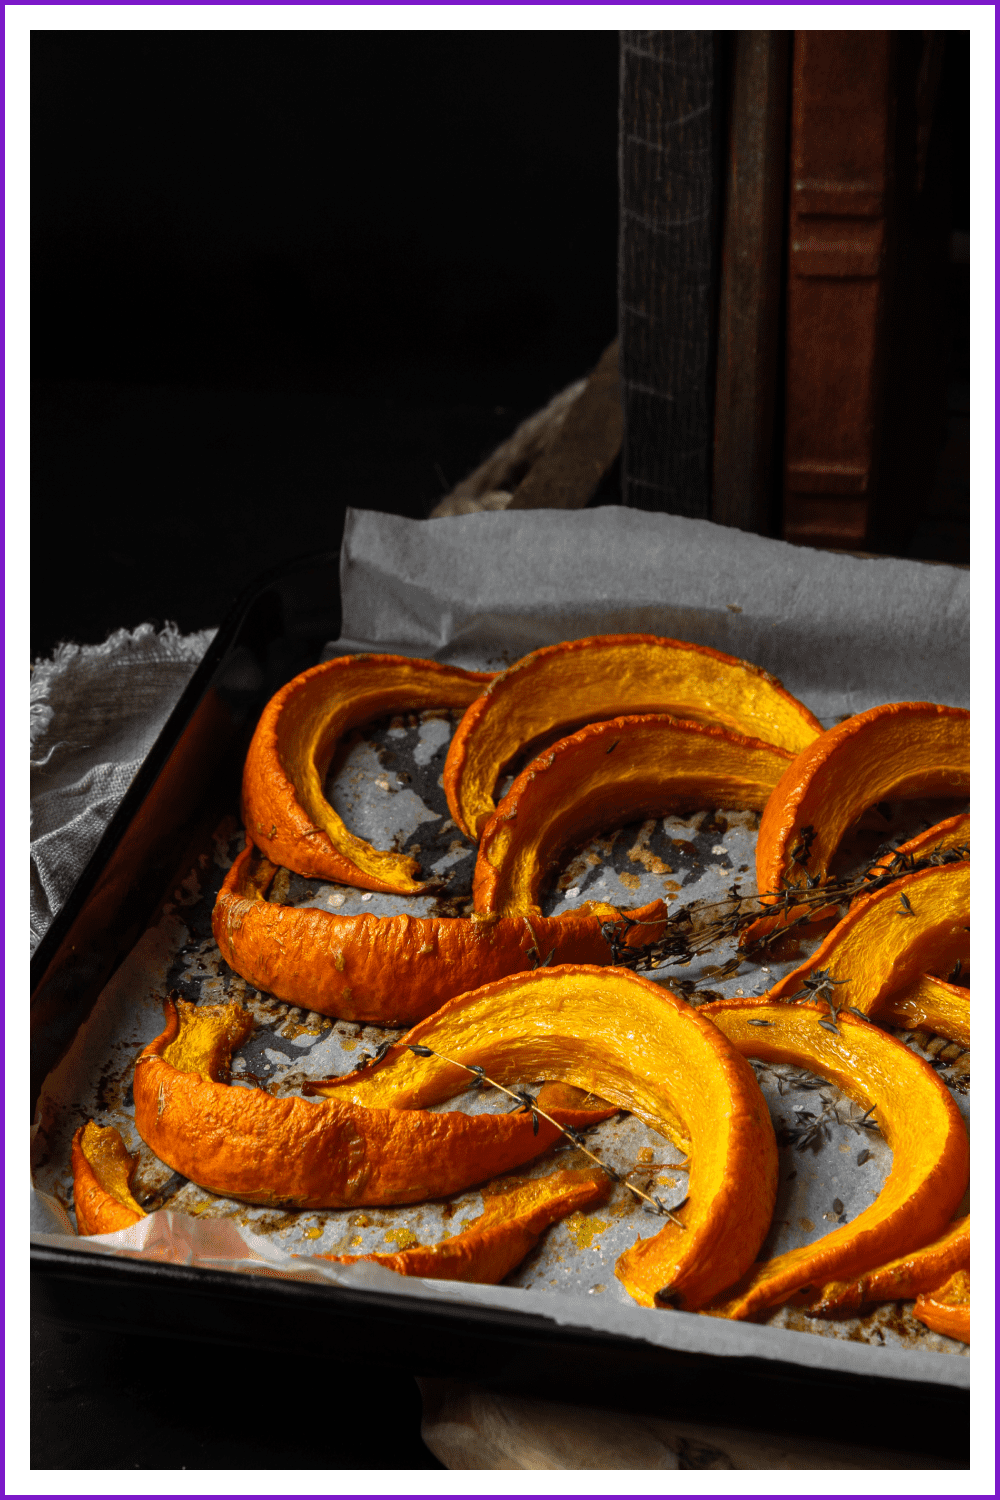 A high-quality photo of baked pieces of pumpkin on a baking sheet.